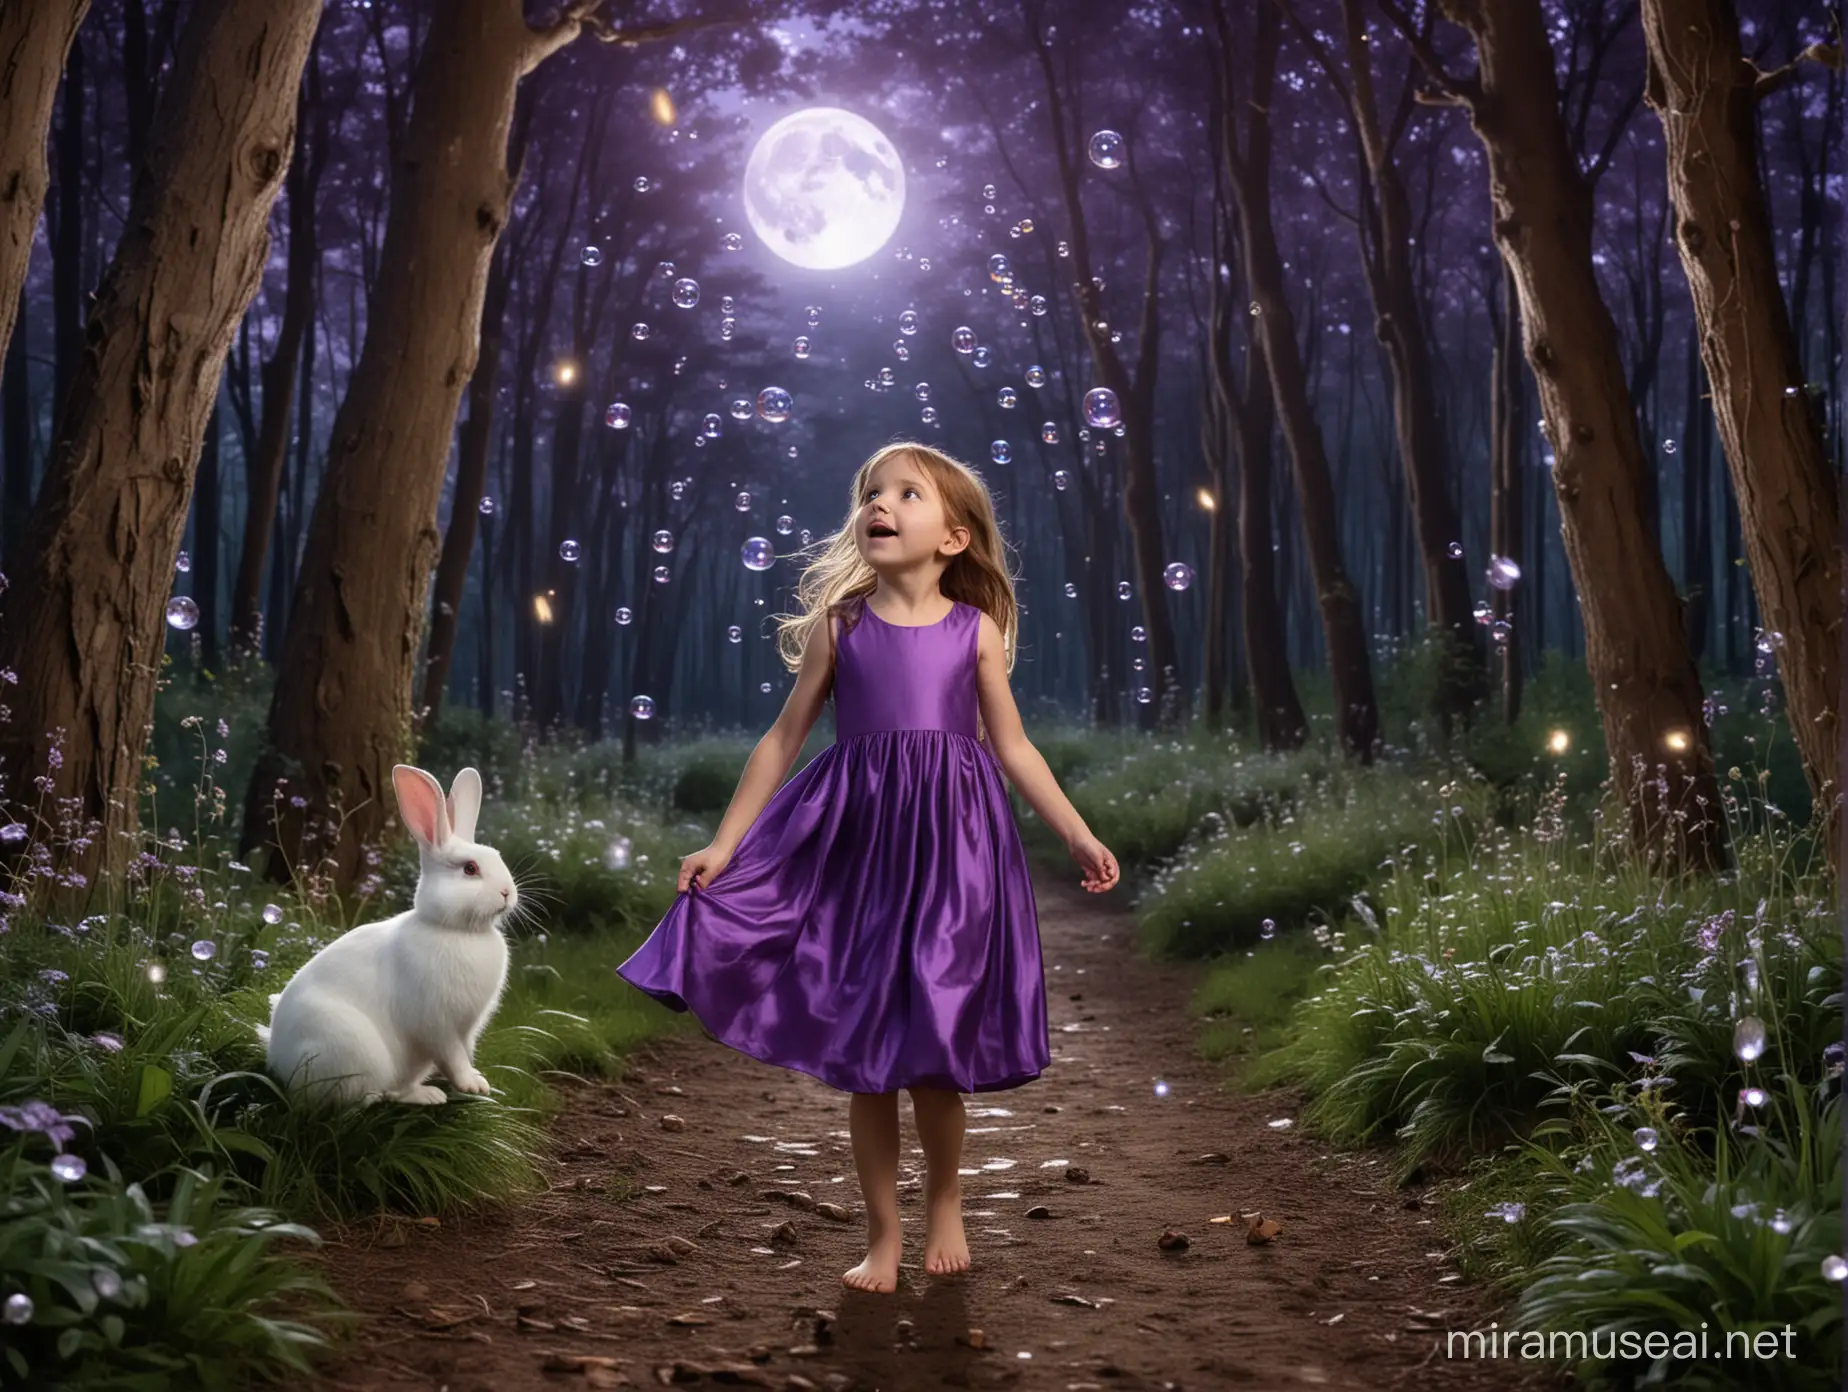 Enchanting Night Stroll Curious Girl in Purple Dress with Rabbit and Fairies